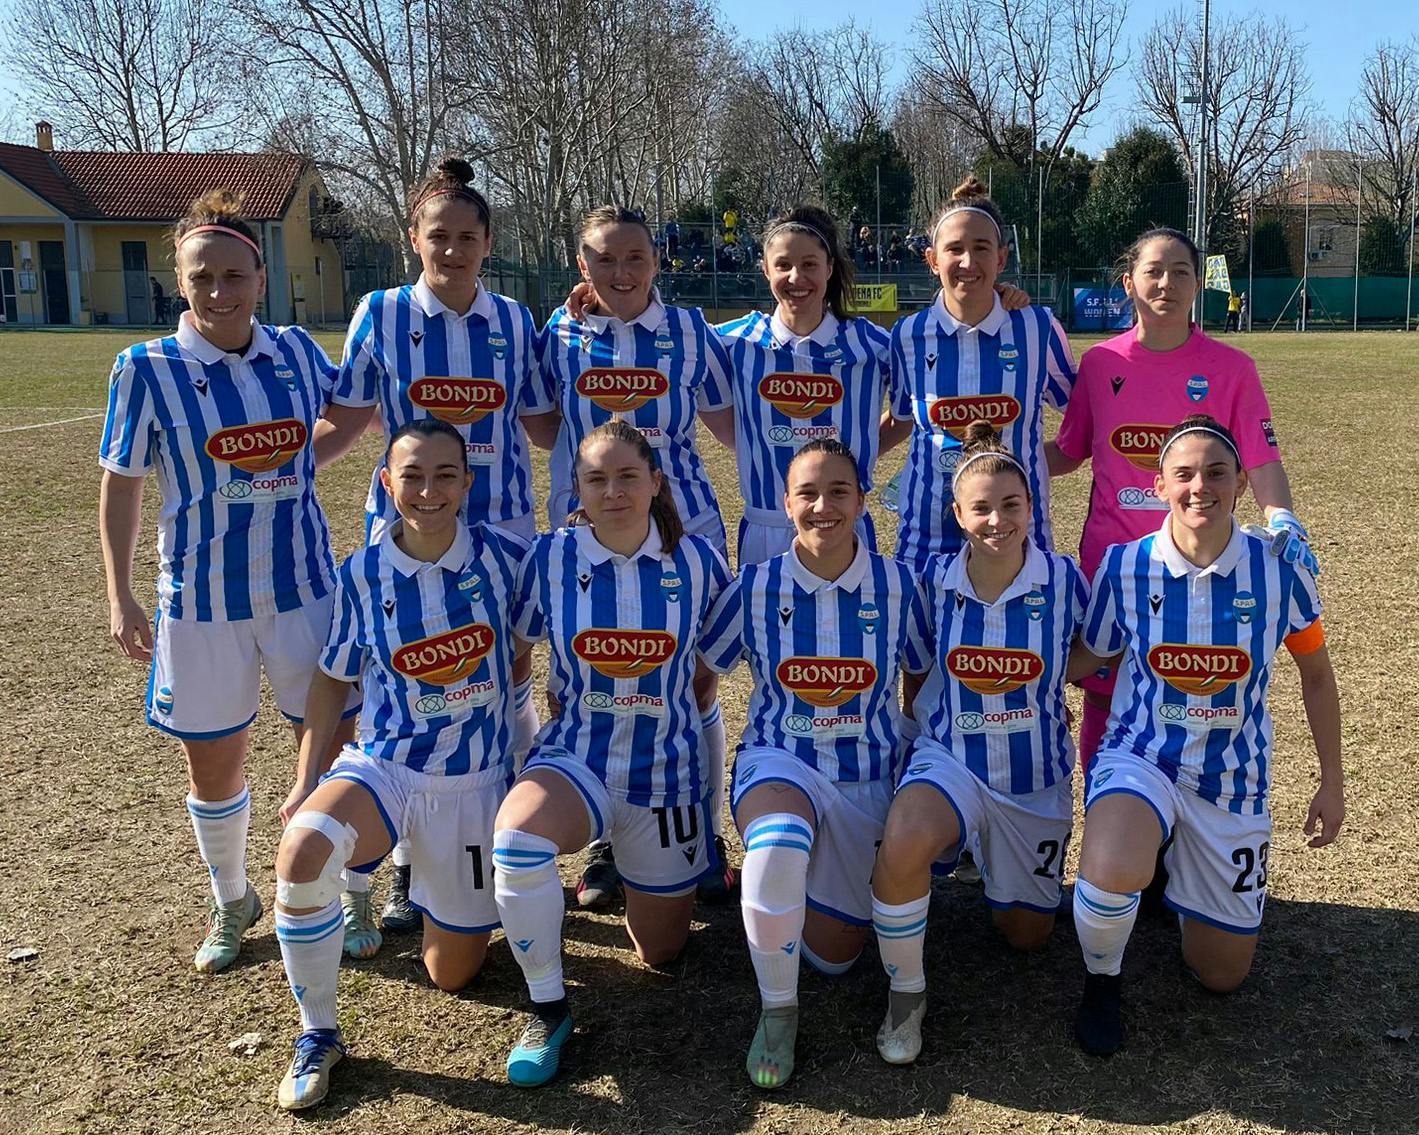 Accademia SPAL wins derby with Modena and flies to first place